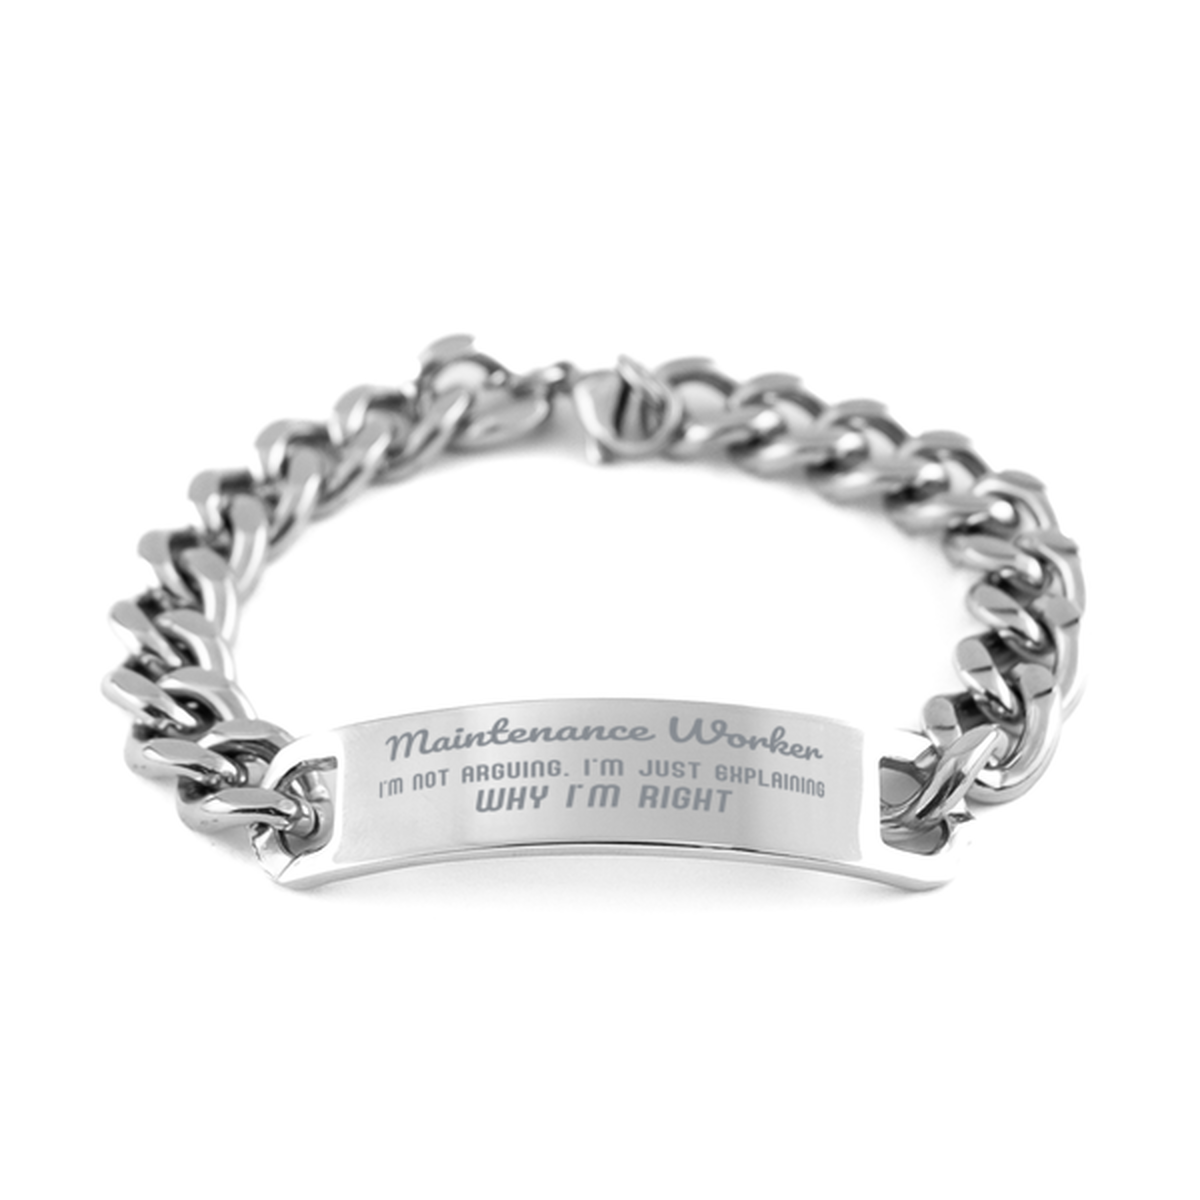 Maintenance Worker I'm not Arguing. I'm Just Explaining Why I'm RIGHT Cuban Chain Stainless Steel Bracelet, Graduation Birthday Christmas Maintenance Worker Gifts For Maintenance Worker Funny Saying Quote Present for Men Women Coworker